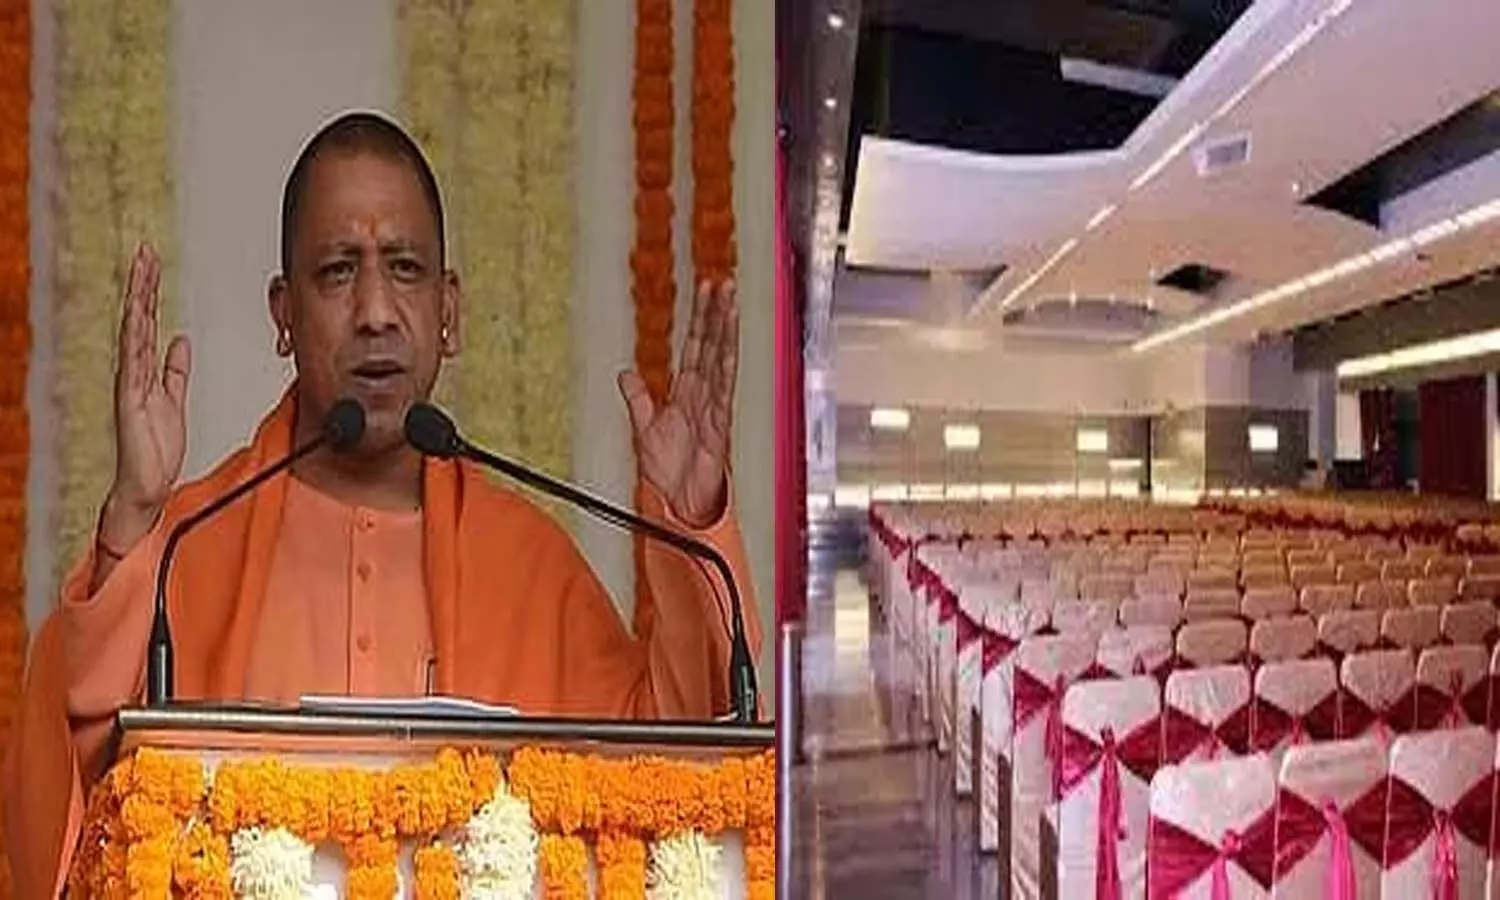 World-class-hi-tech convention center to be built in the capital, CM Yogi gave necessary guidelines